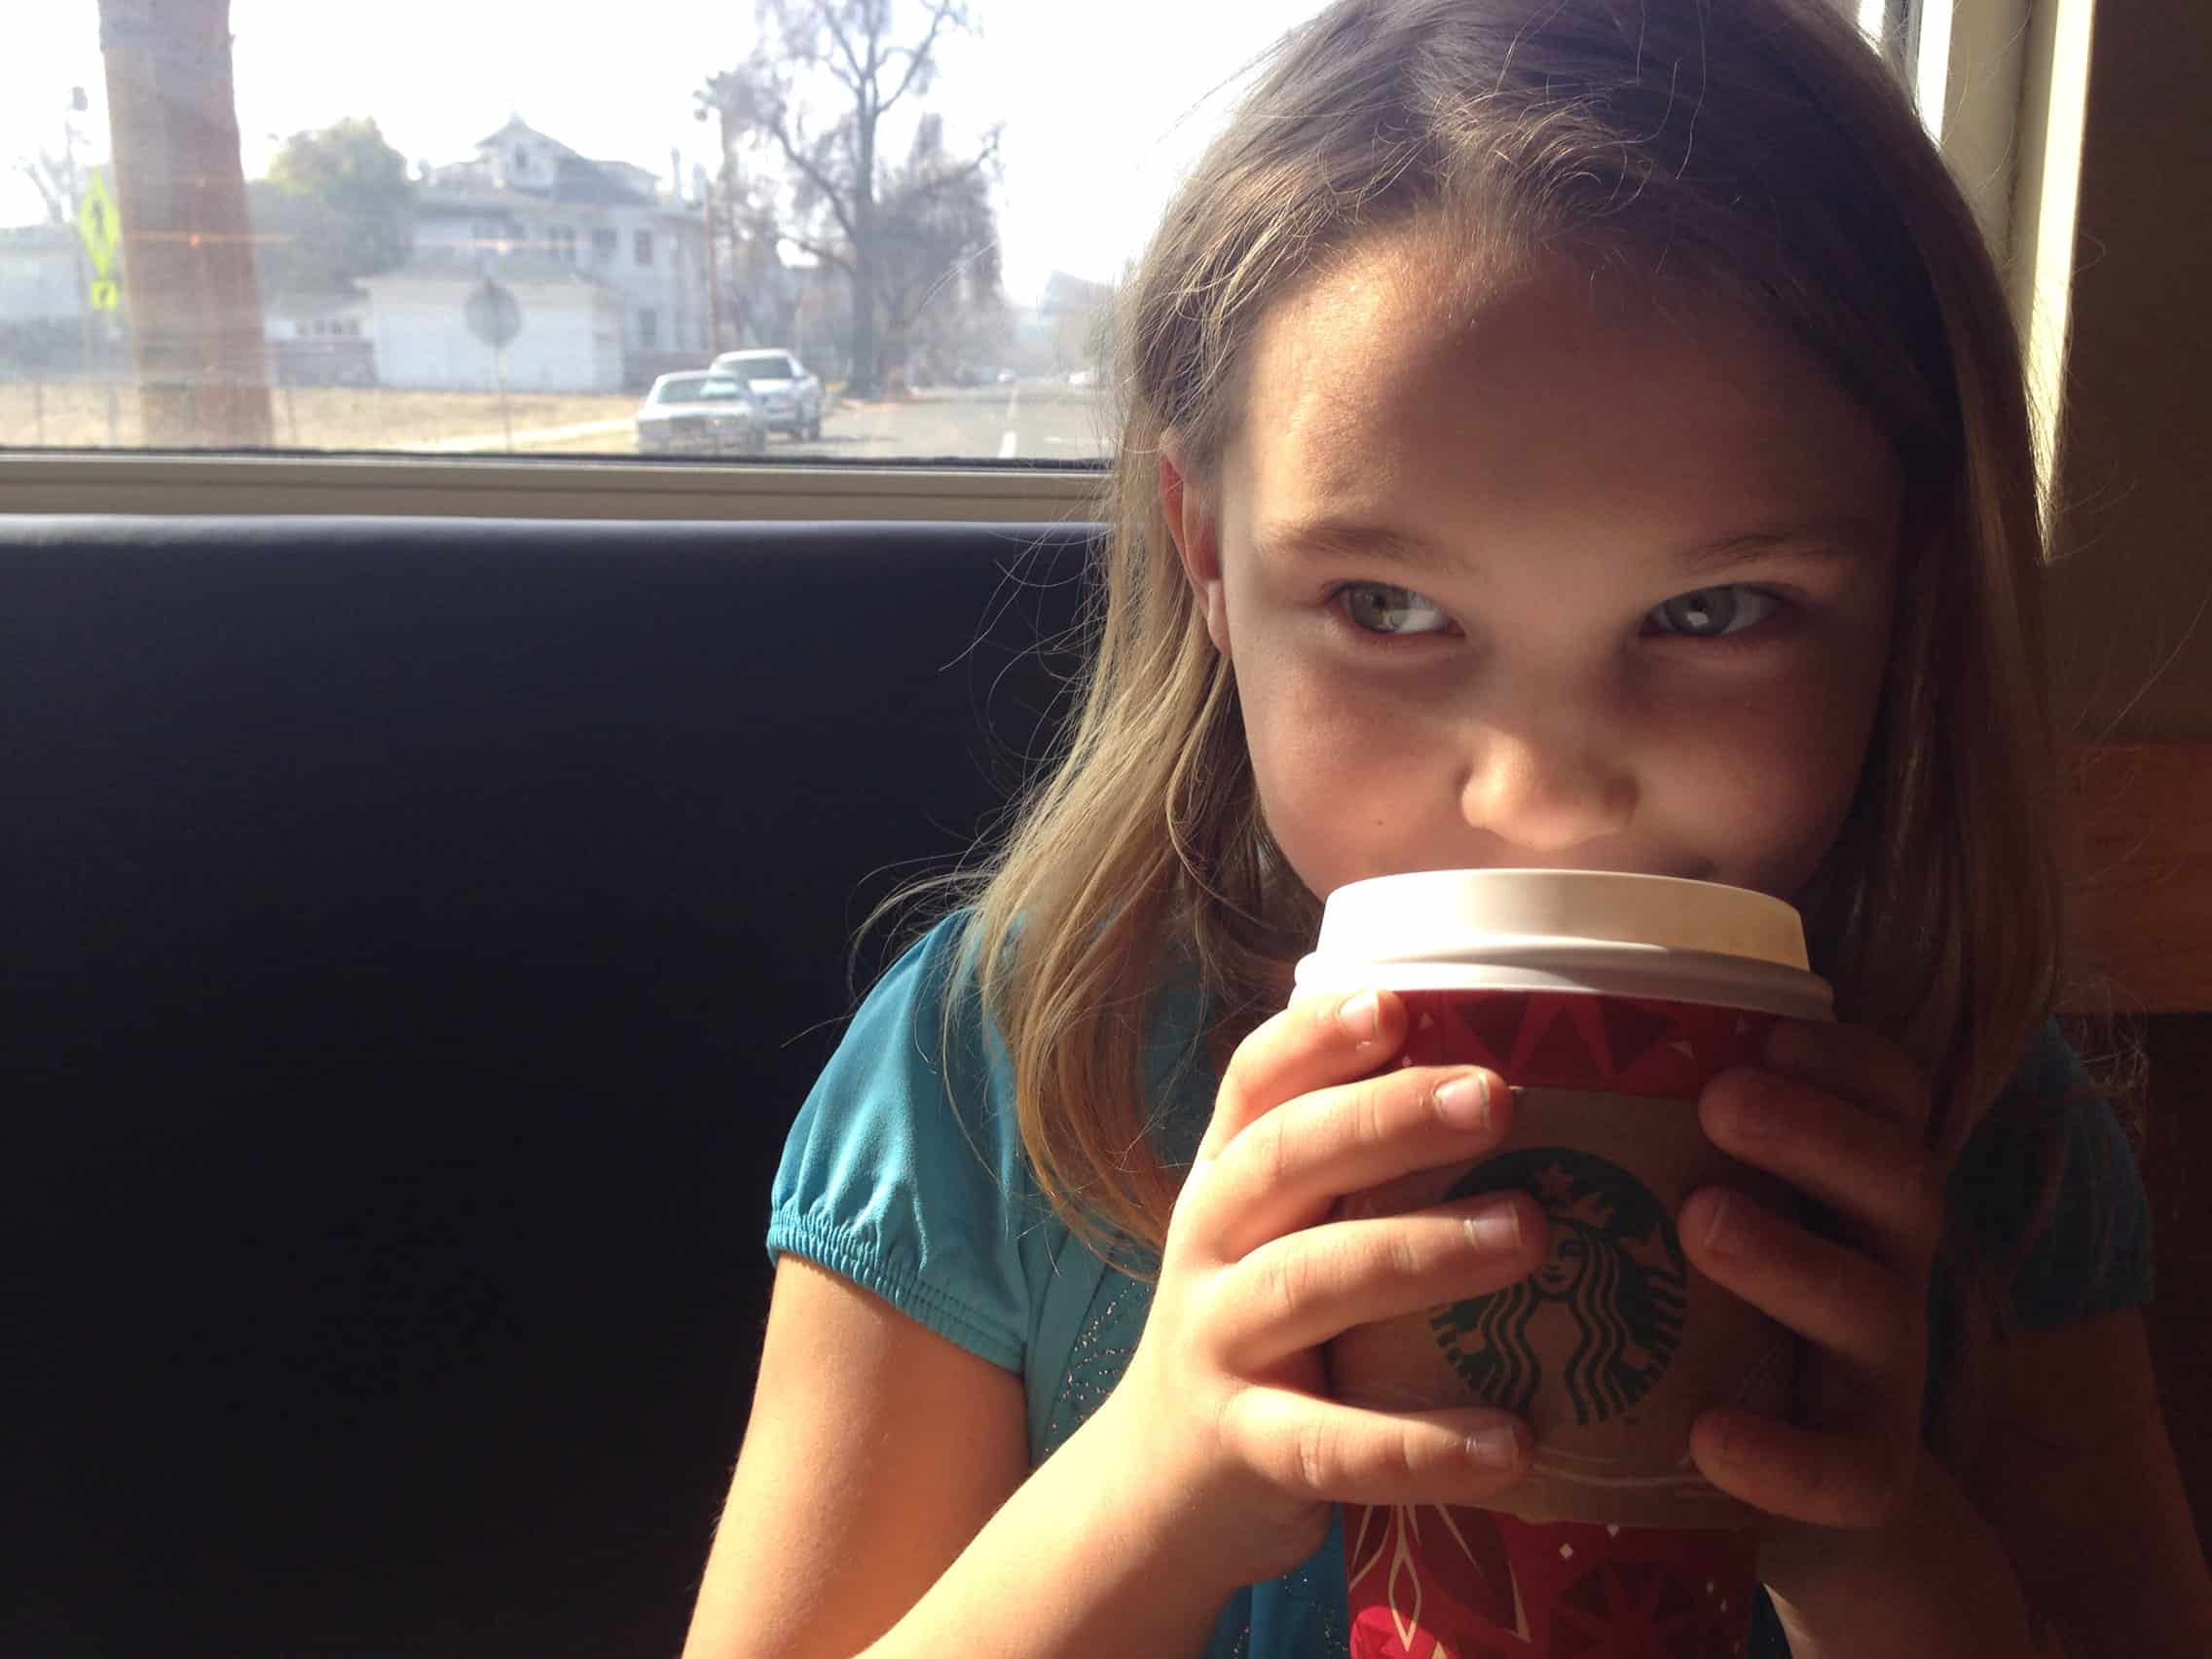 Young girl at Starbucks drinking hot chocolate